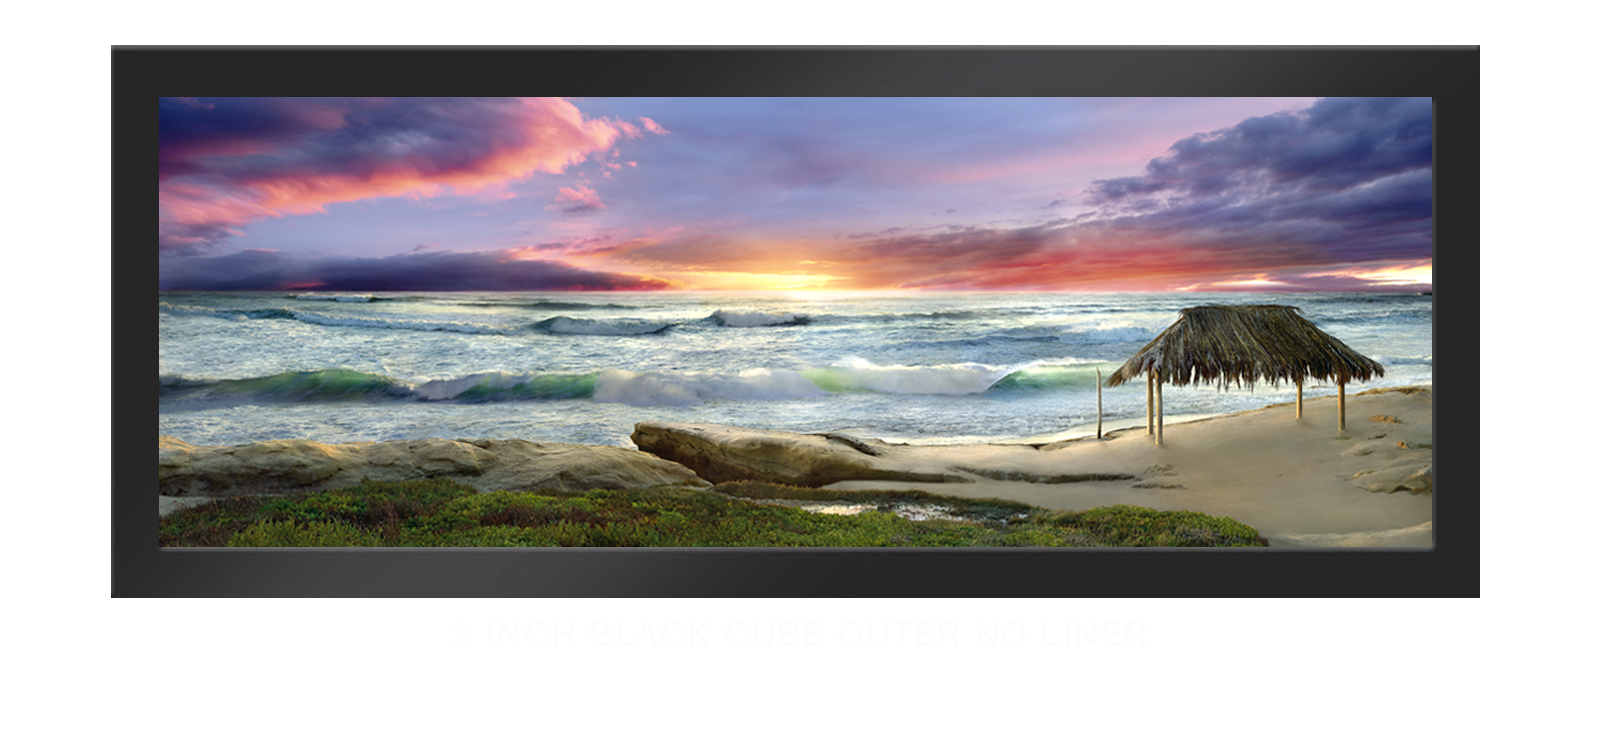 13SAWAITANCE 3 Inch Black Cube Outer w_No Liner T